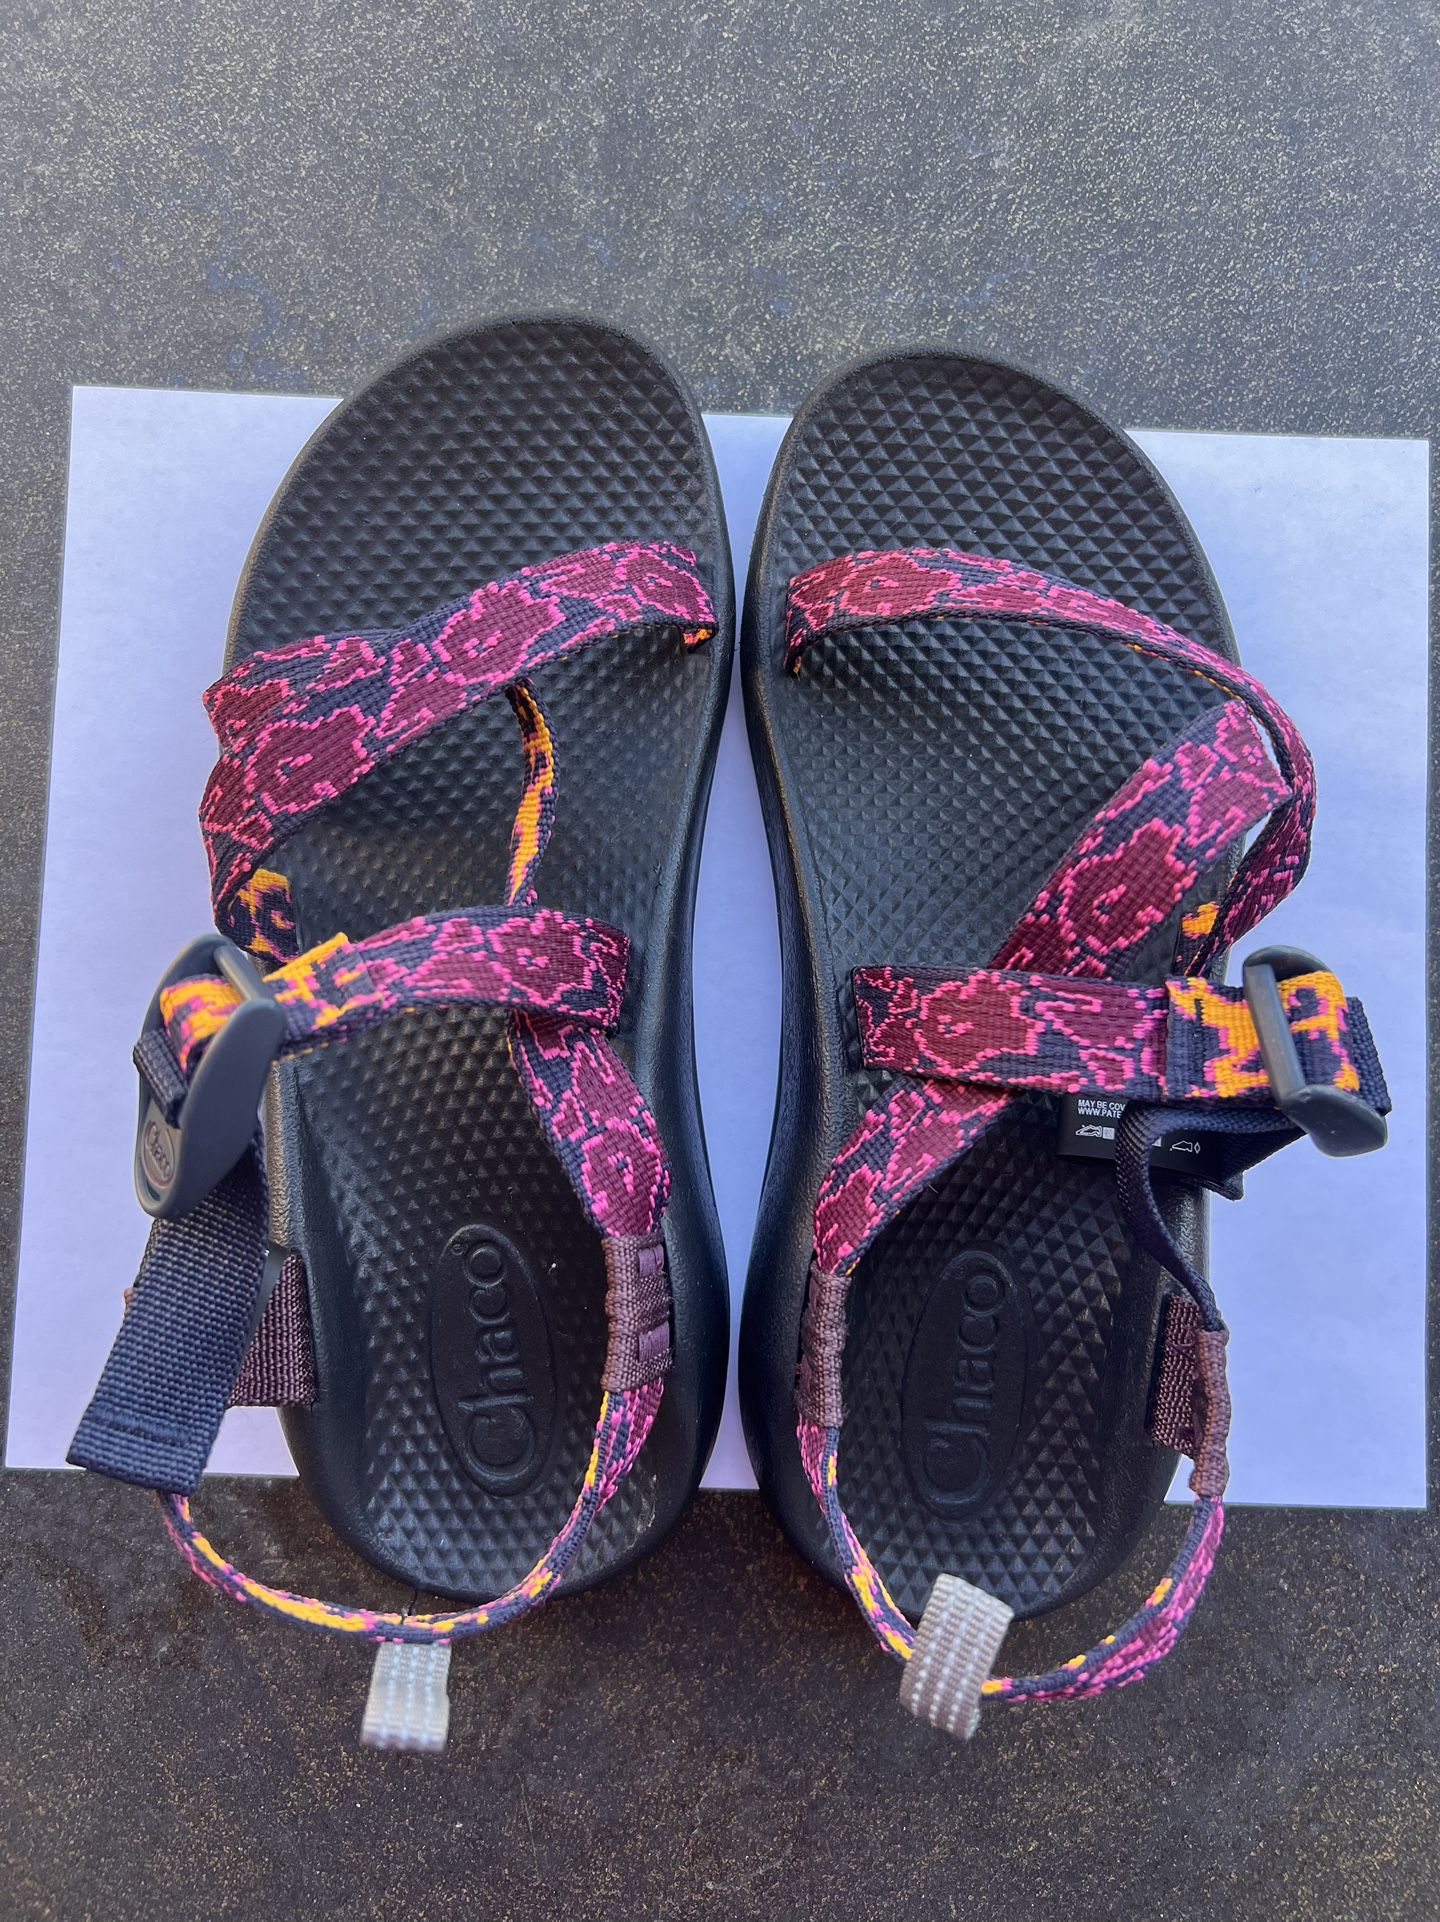 Chaco Sandals Size 4